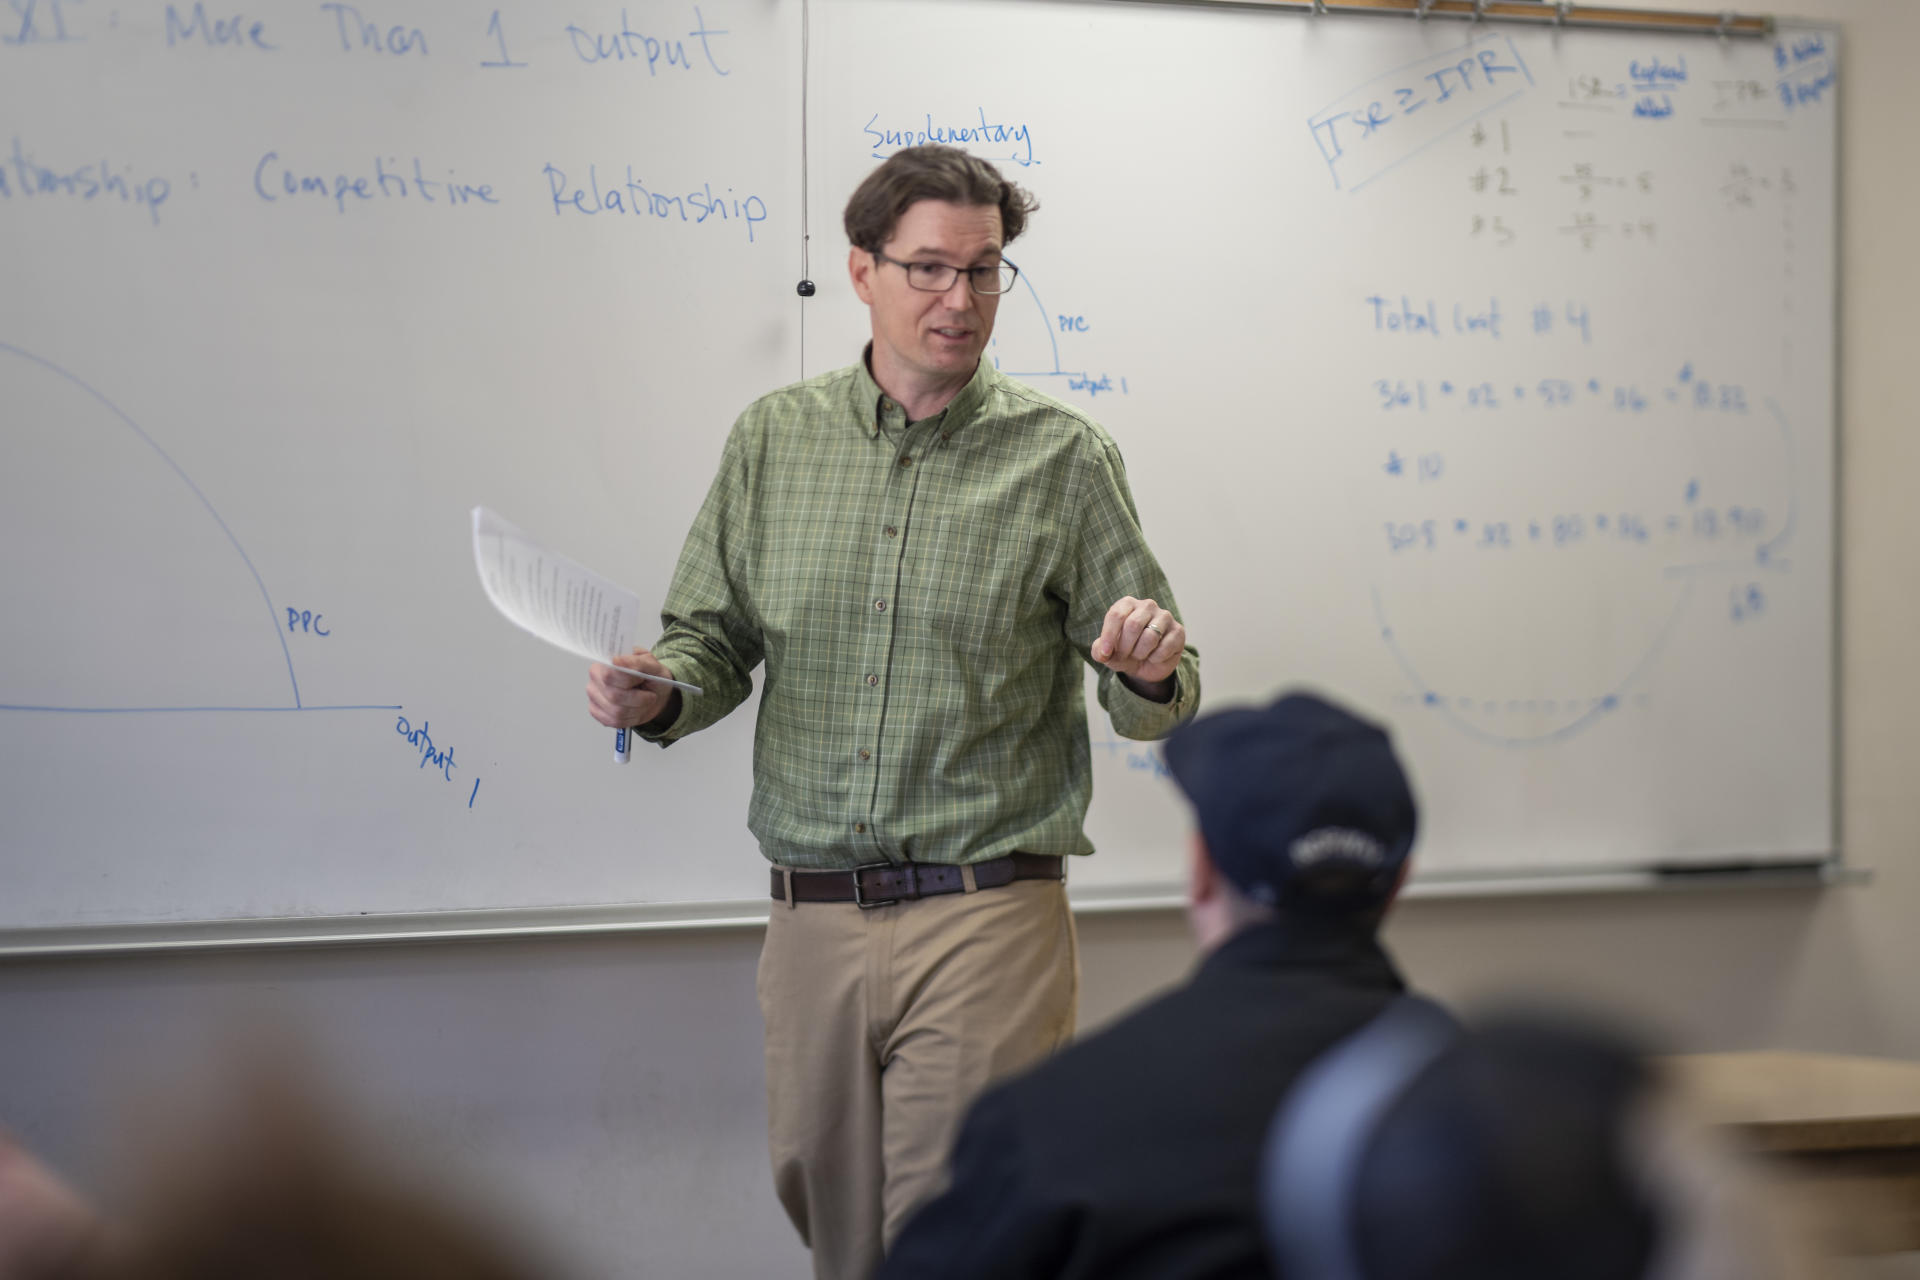 Professor Eric Houk teaches students in his class.